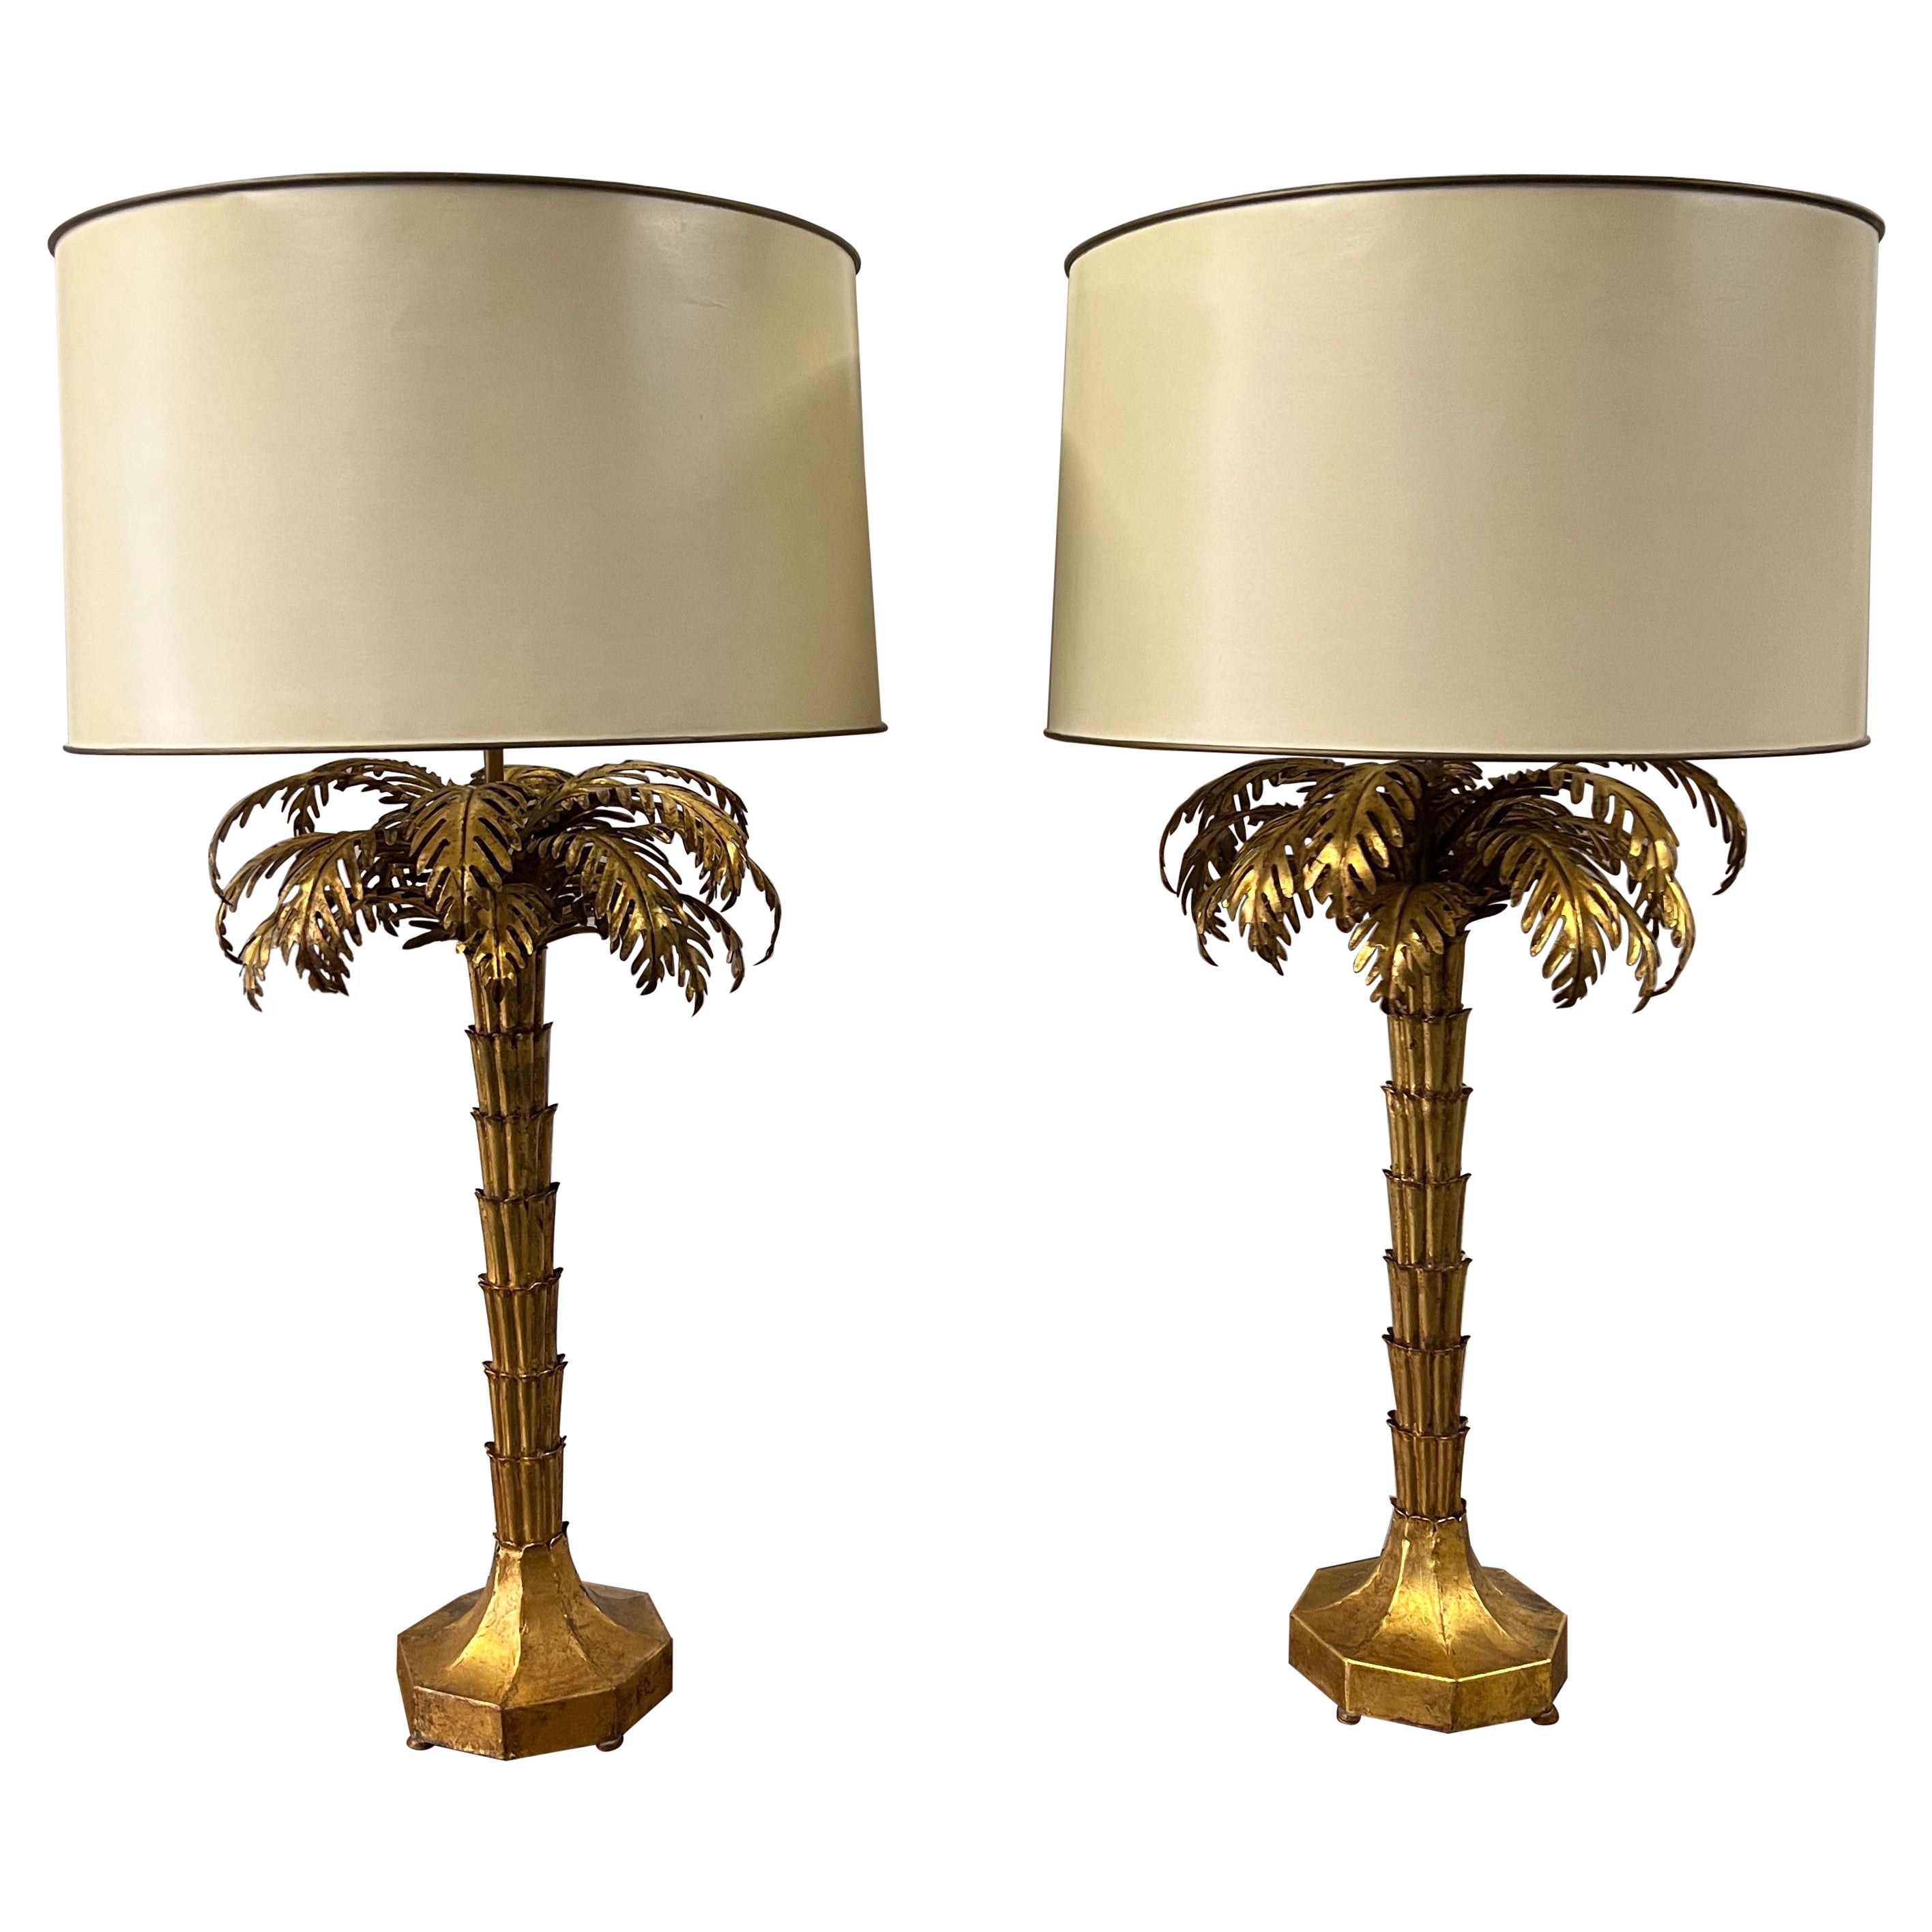 Pair of 1950's Gilt Palm Tree Lamps attributed to Warren Kessler For Sale